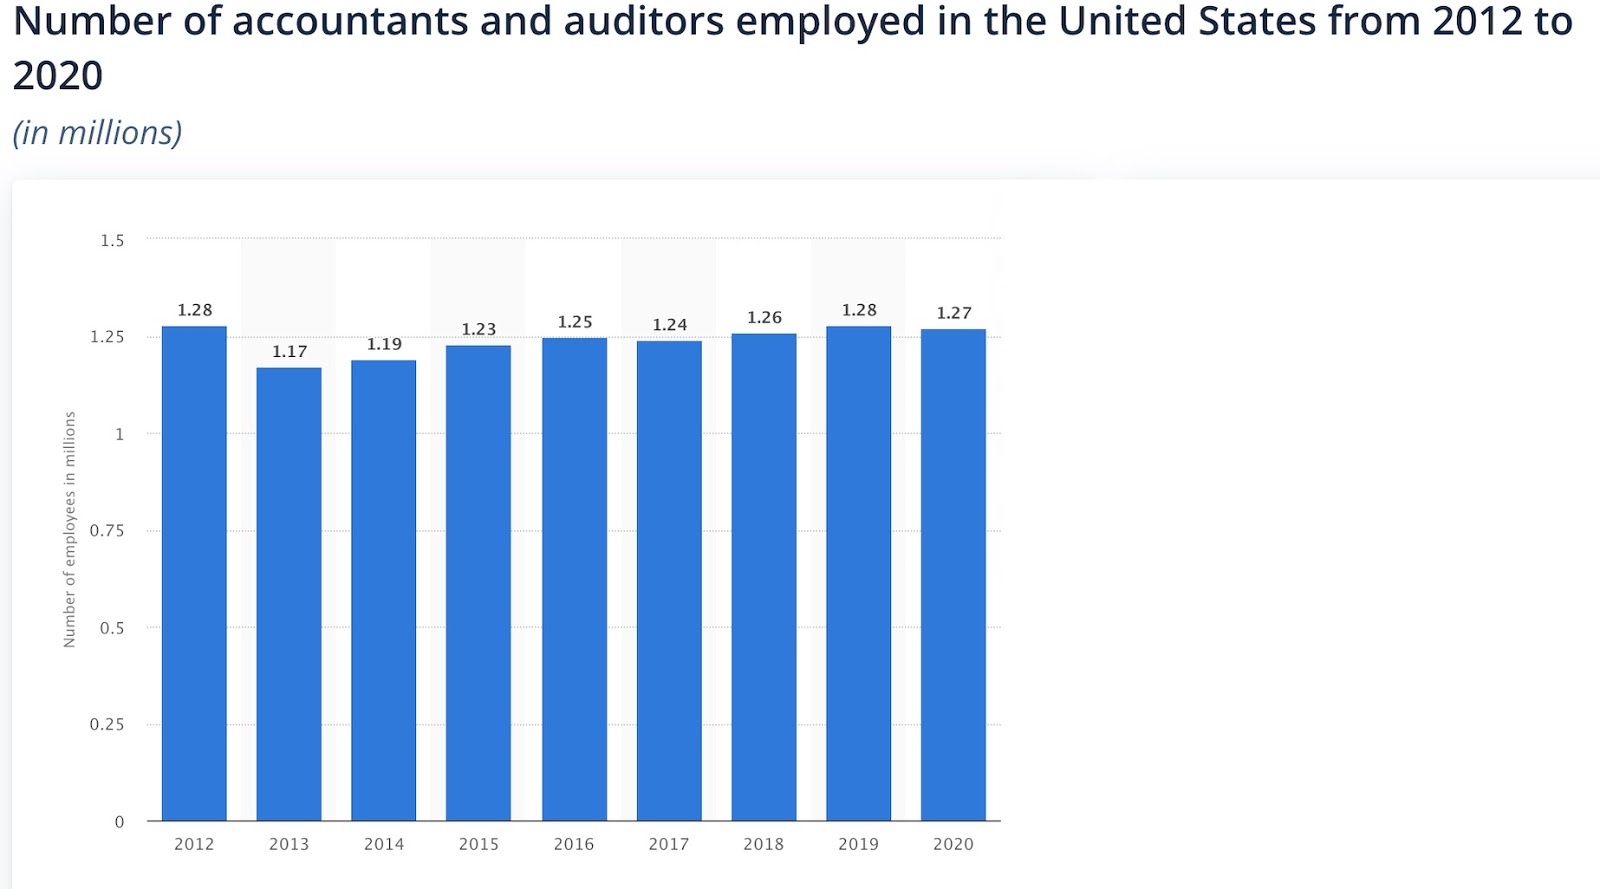 Number of Accountants and Auditors Employed in the US